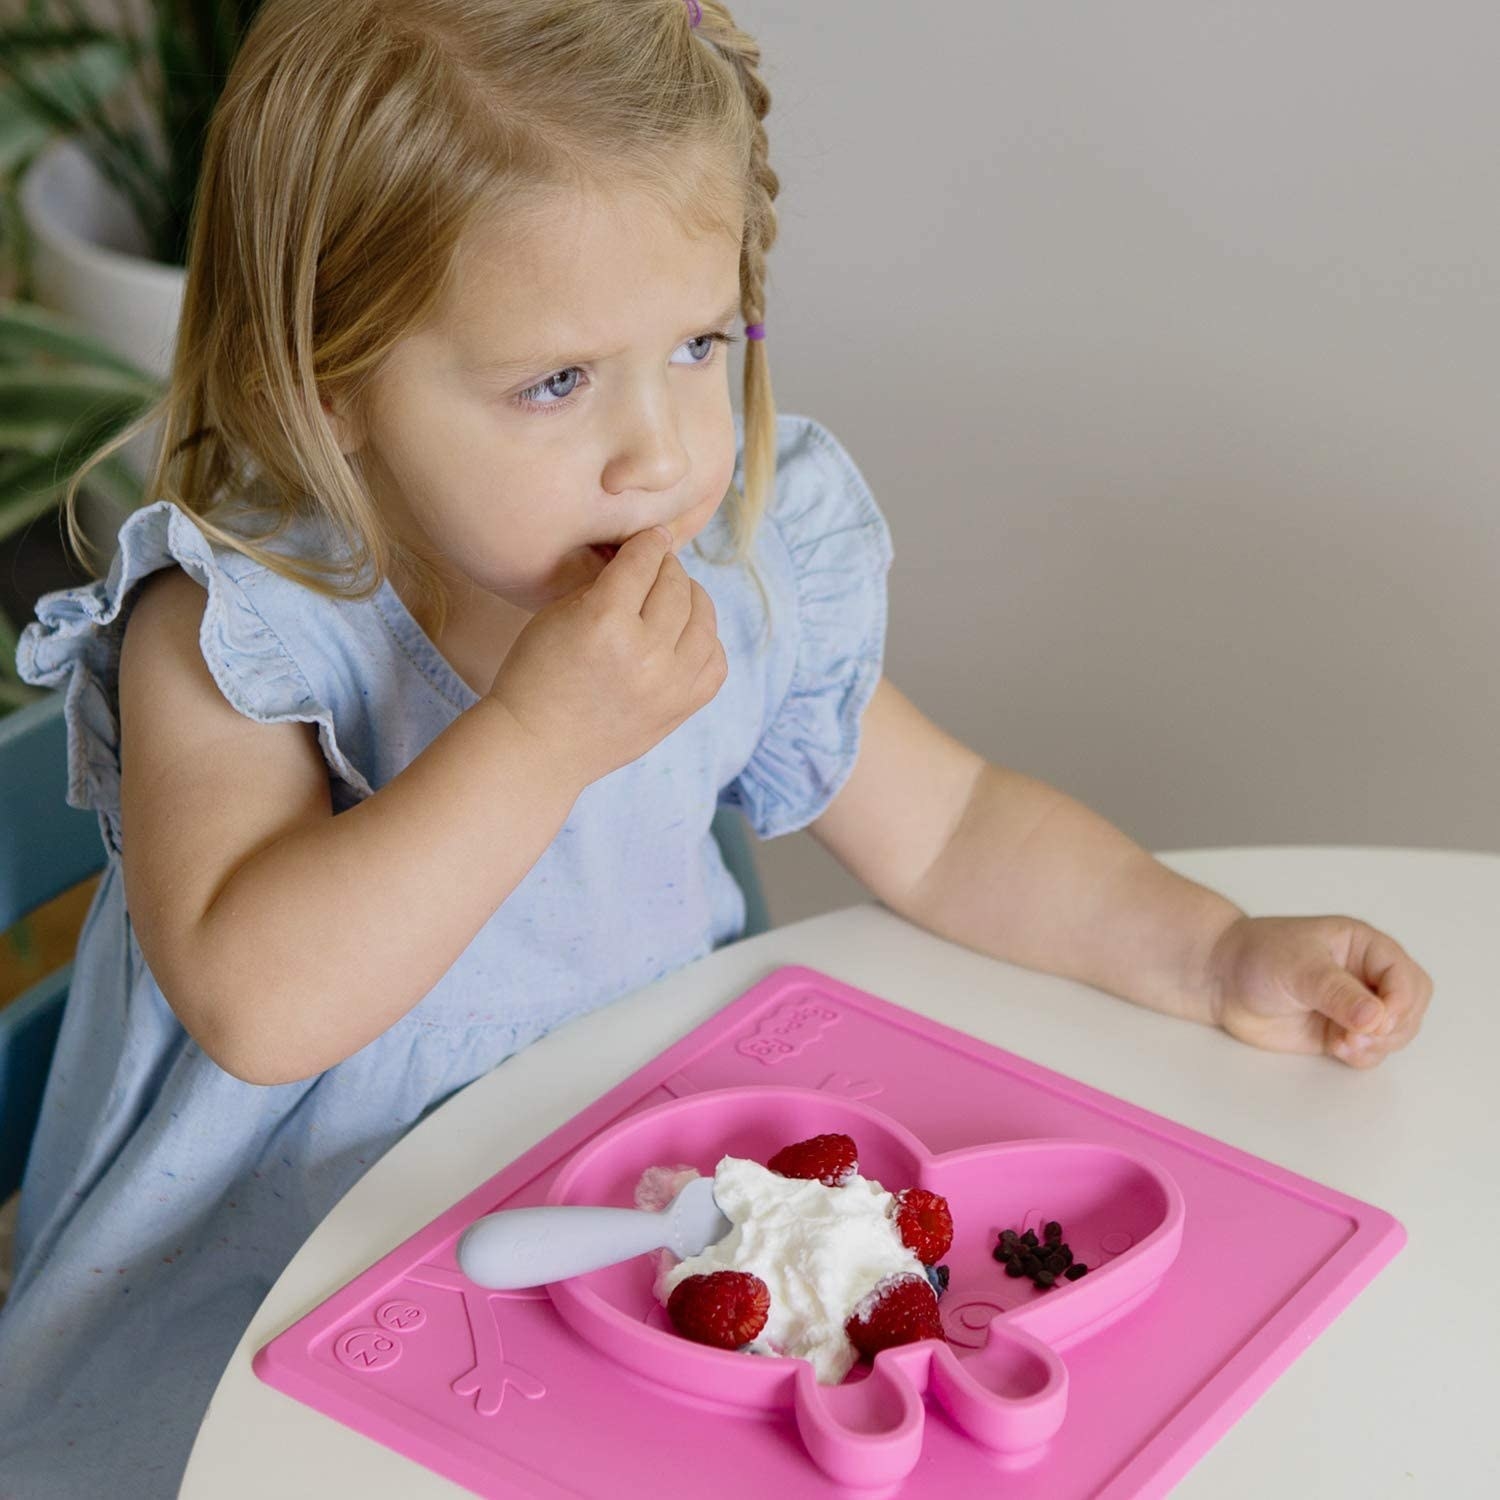 small child eats out of pink silicone peppa pig m